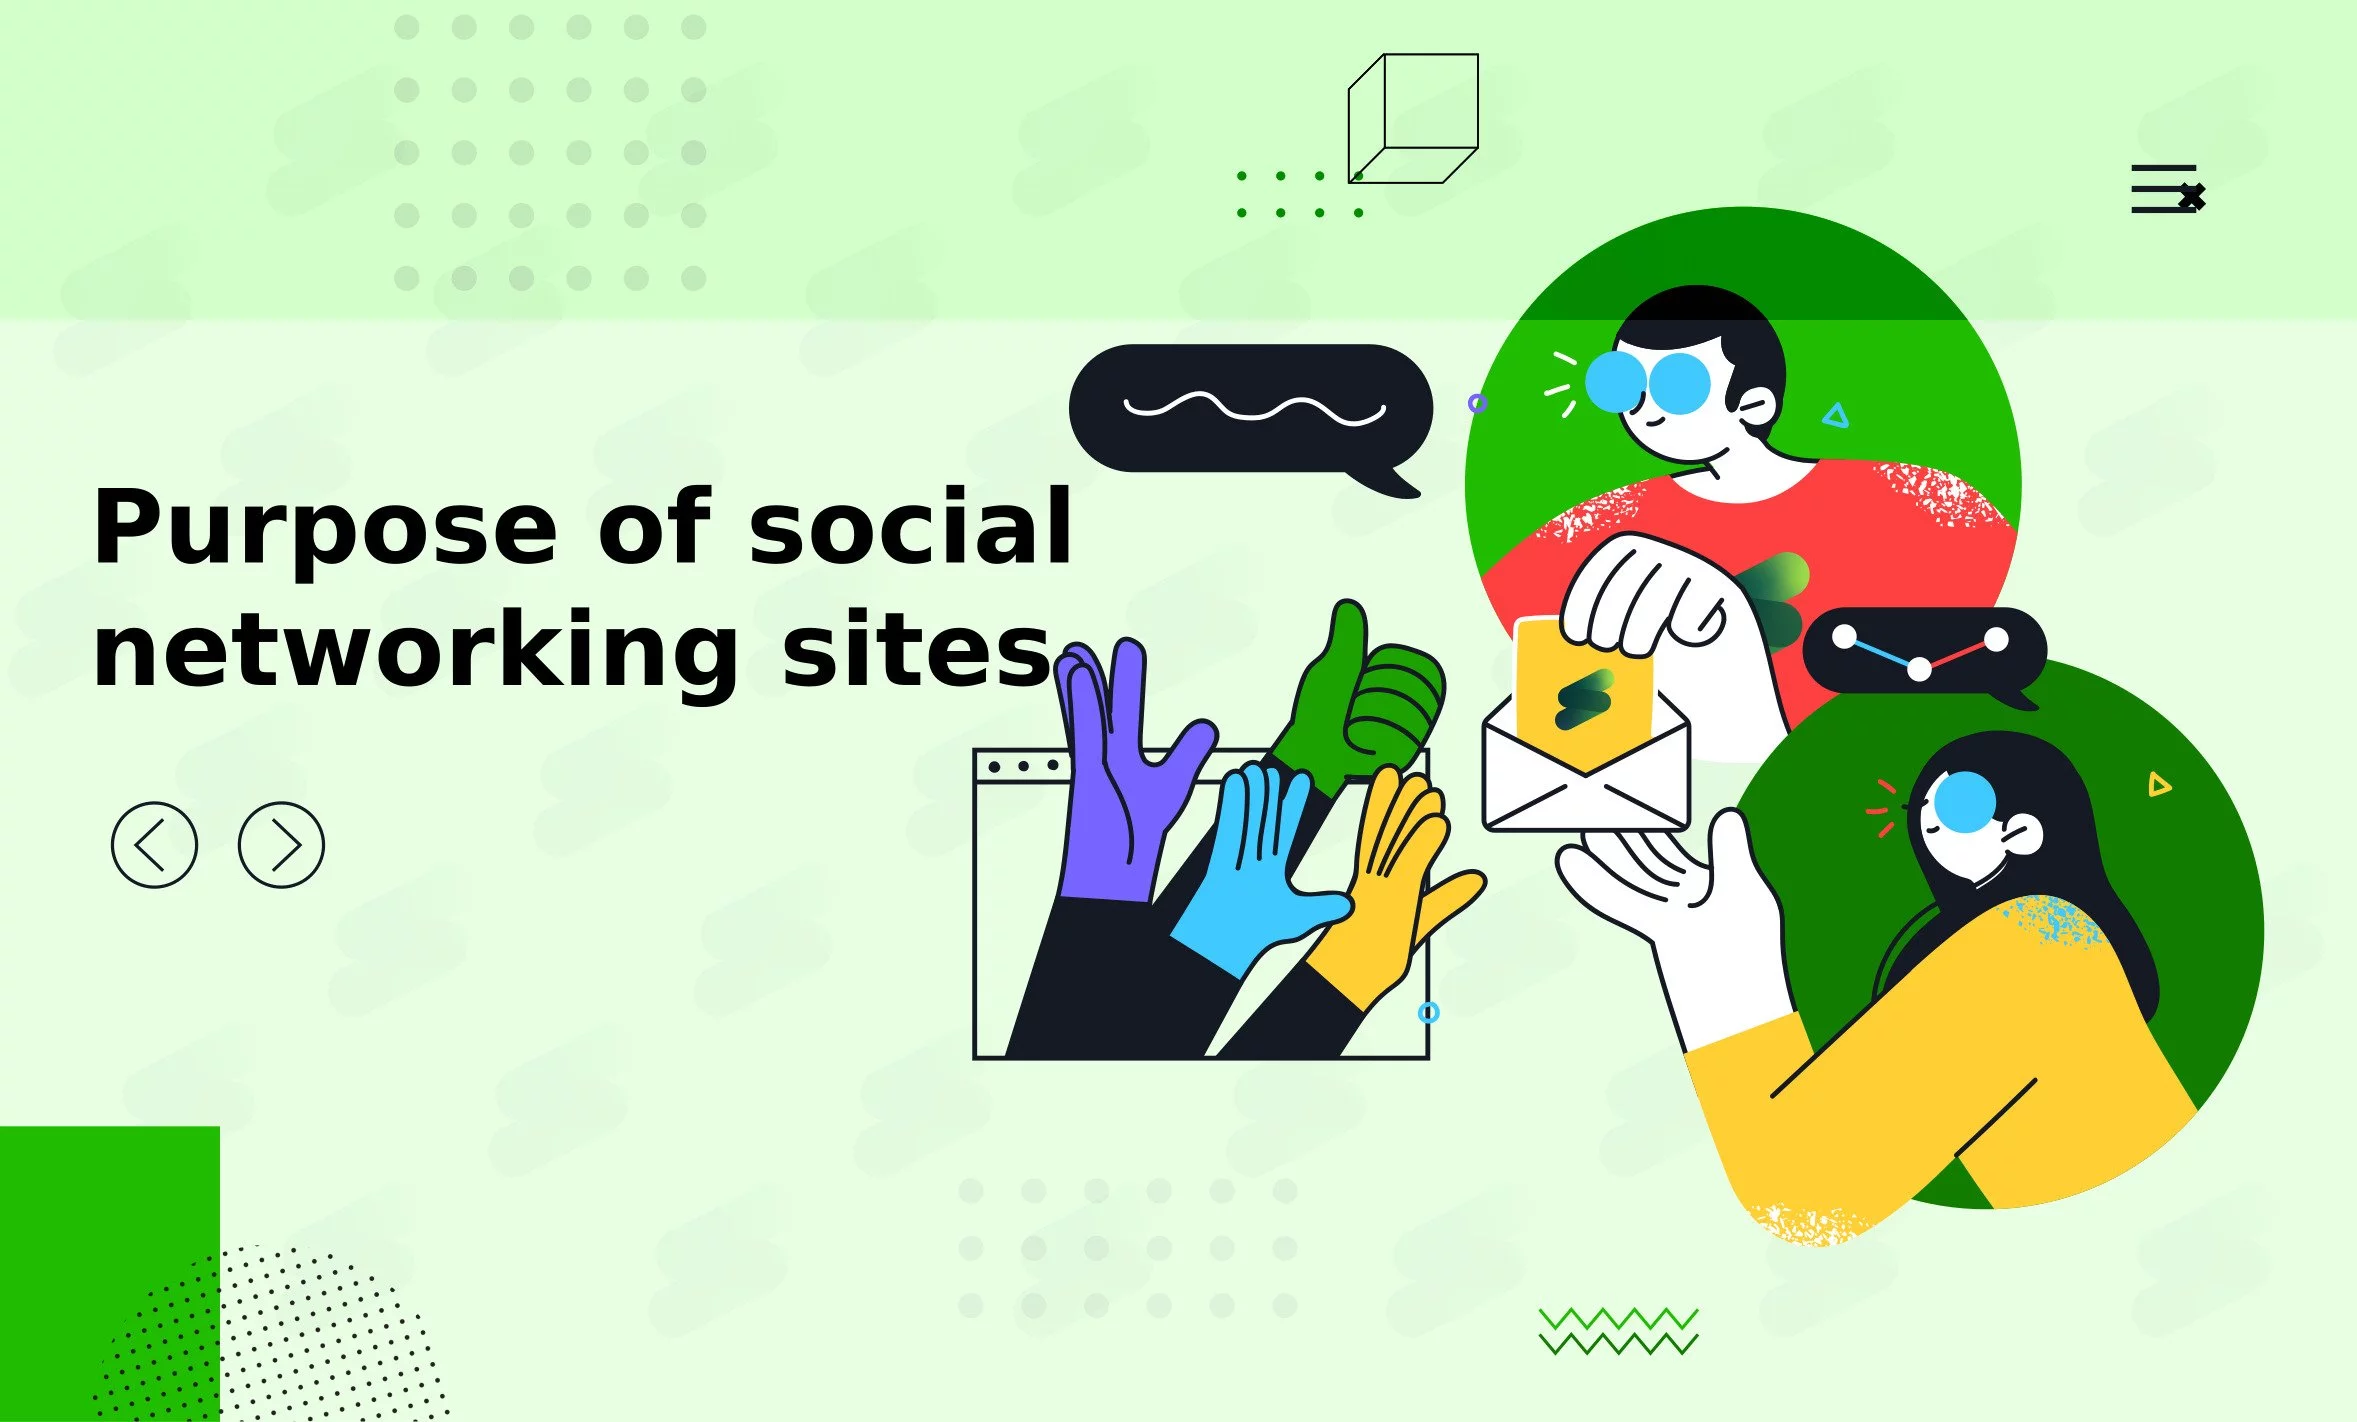 Purpose of social networking sites